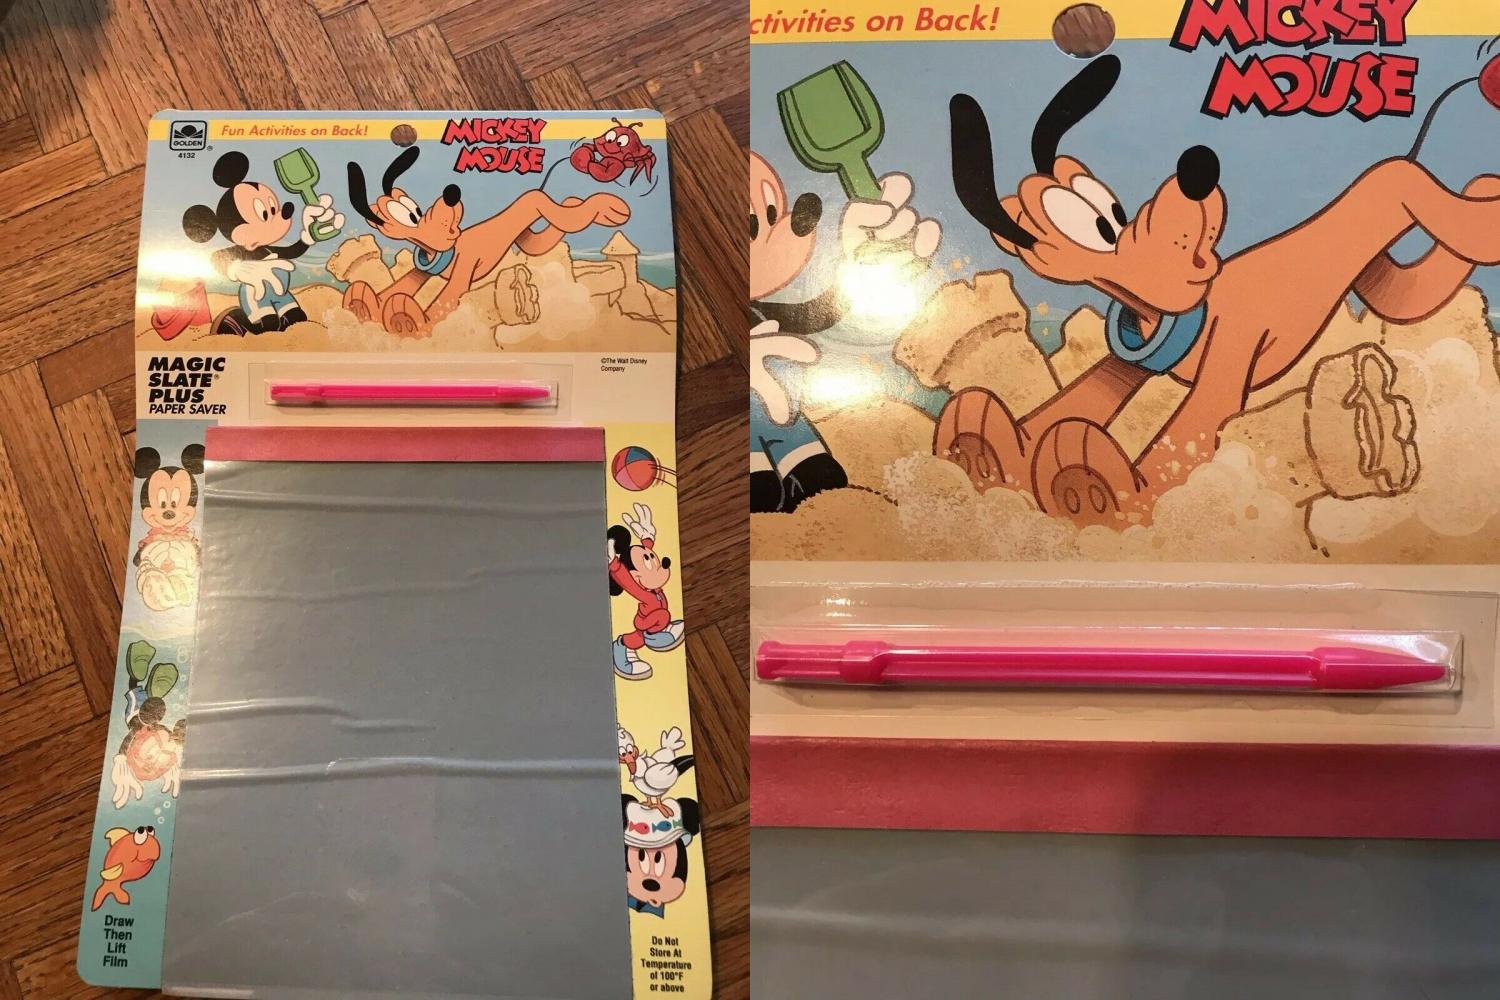 Nostalgic Magic Slate Paper Savers From The 80's and 90's